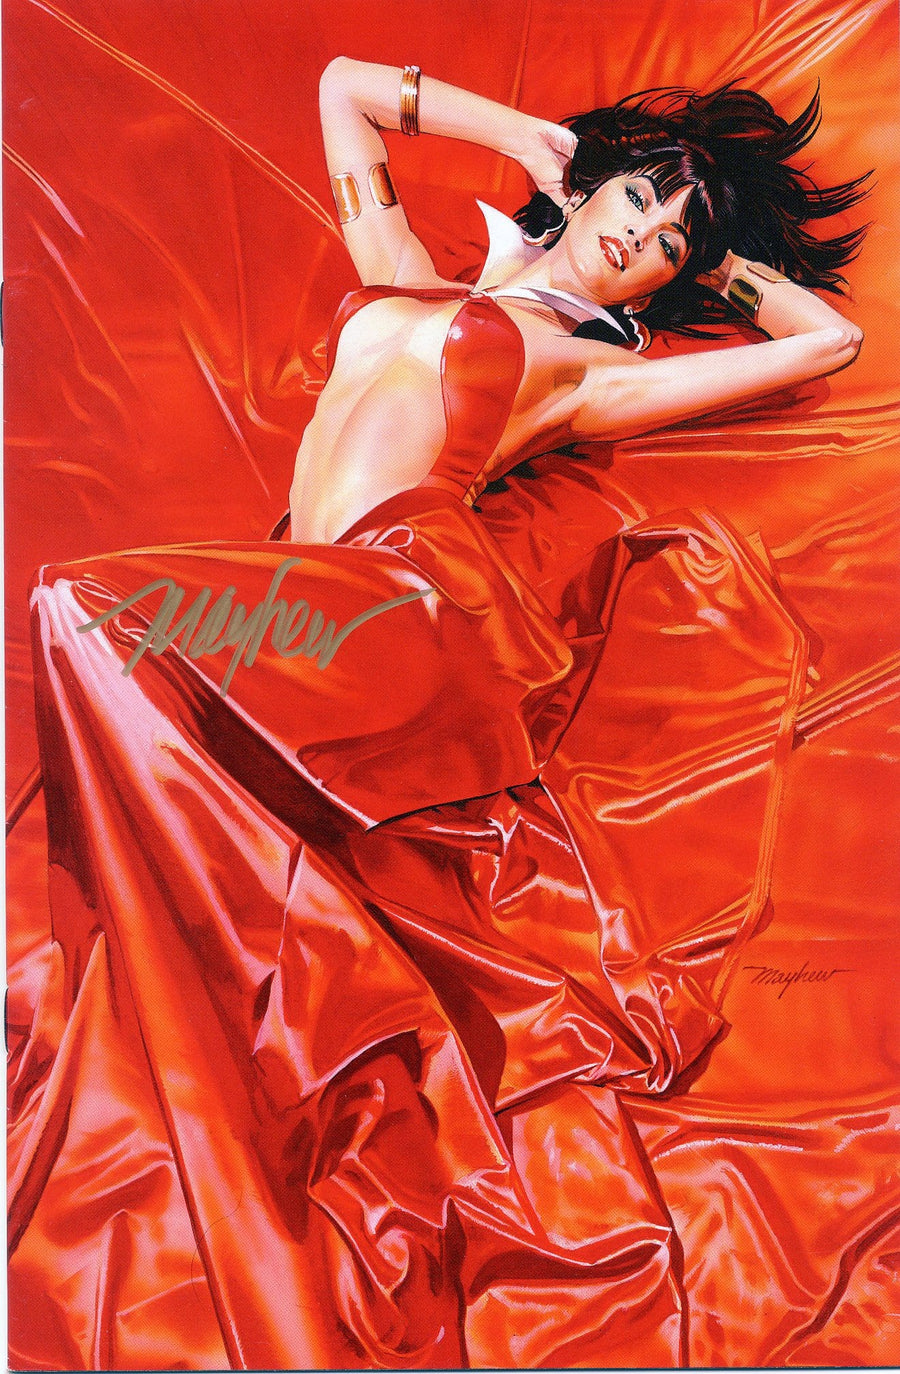 VAMPIRELLA: ROSES FOR THE DEAD #1 Mike Mayhew Variant SIGNED Cover “A” LTD 500